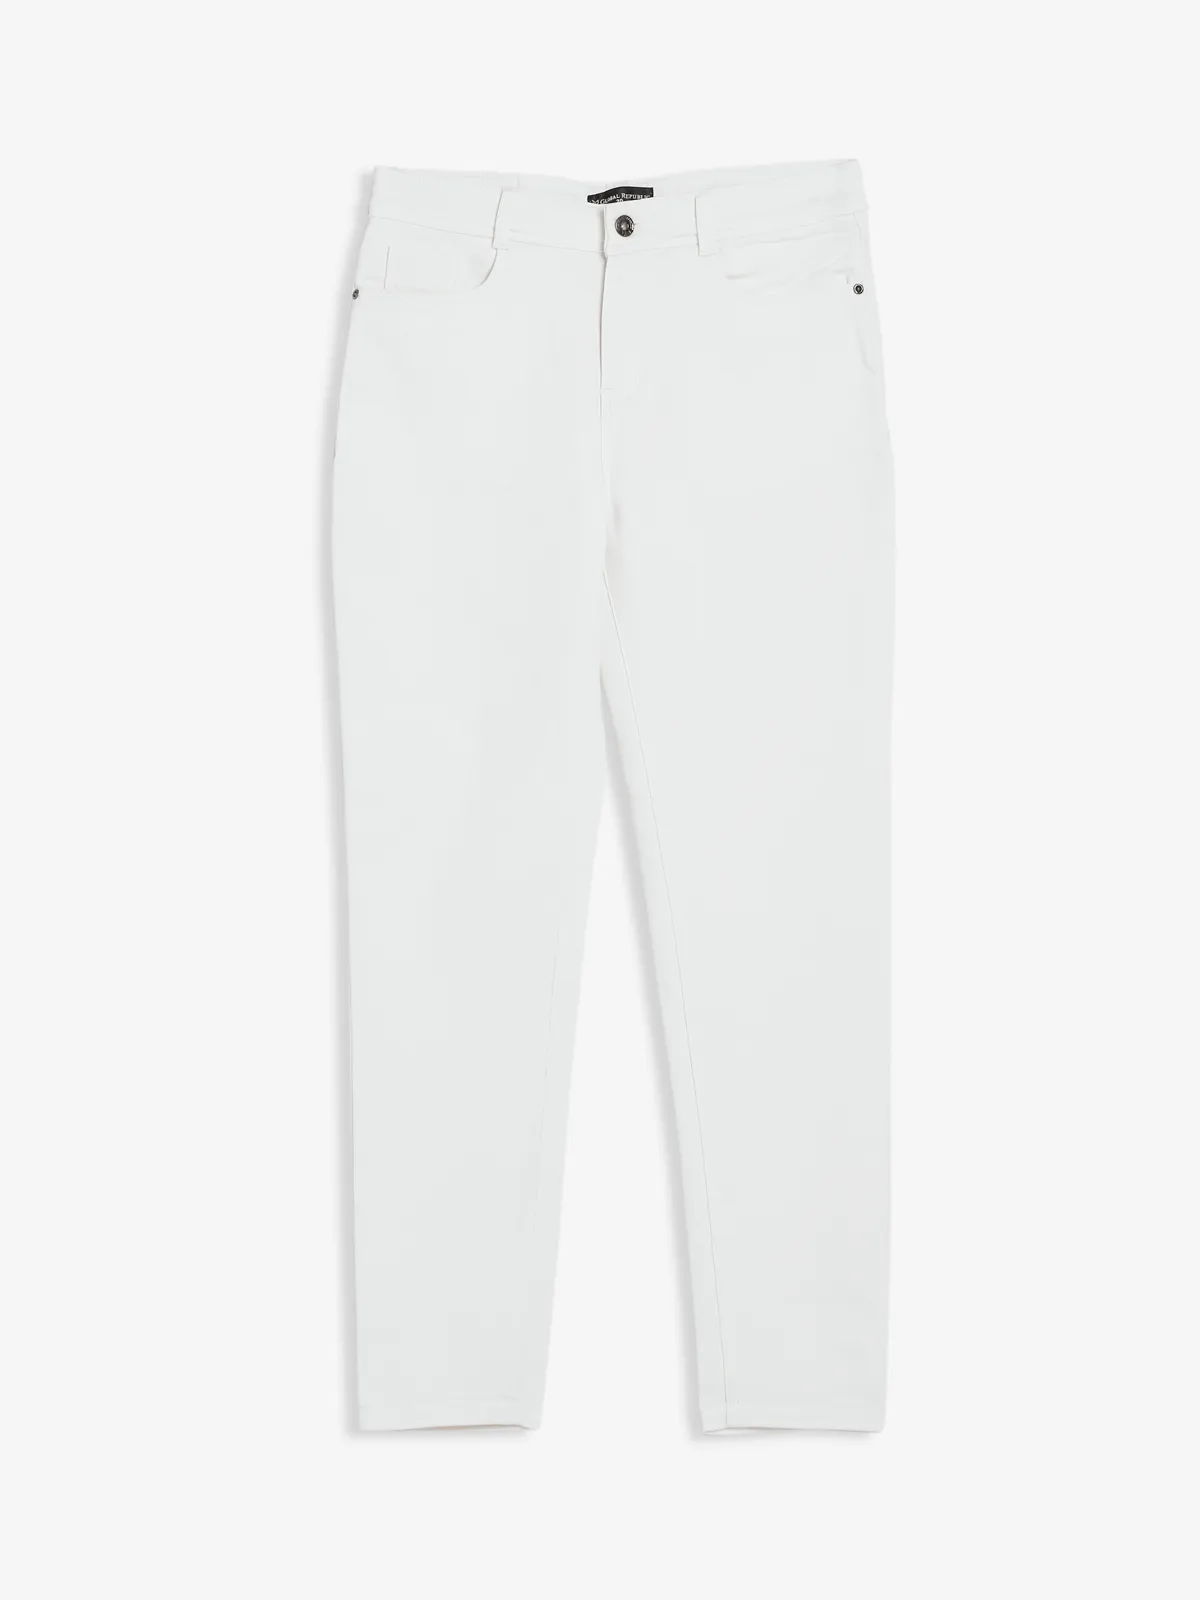 Global Republic white solid jeans